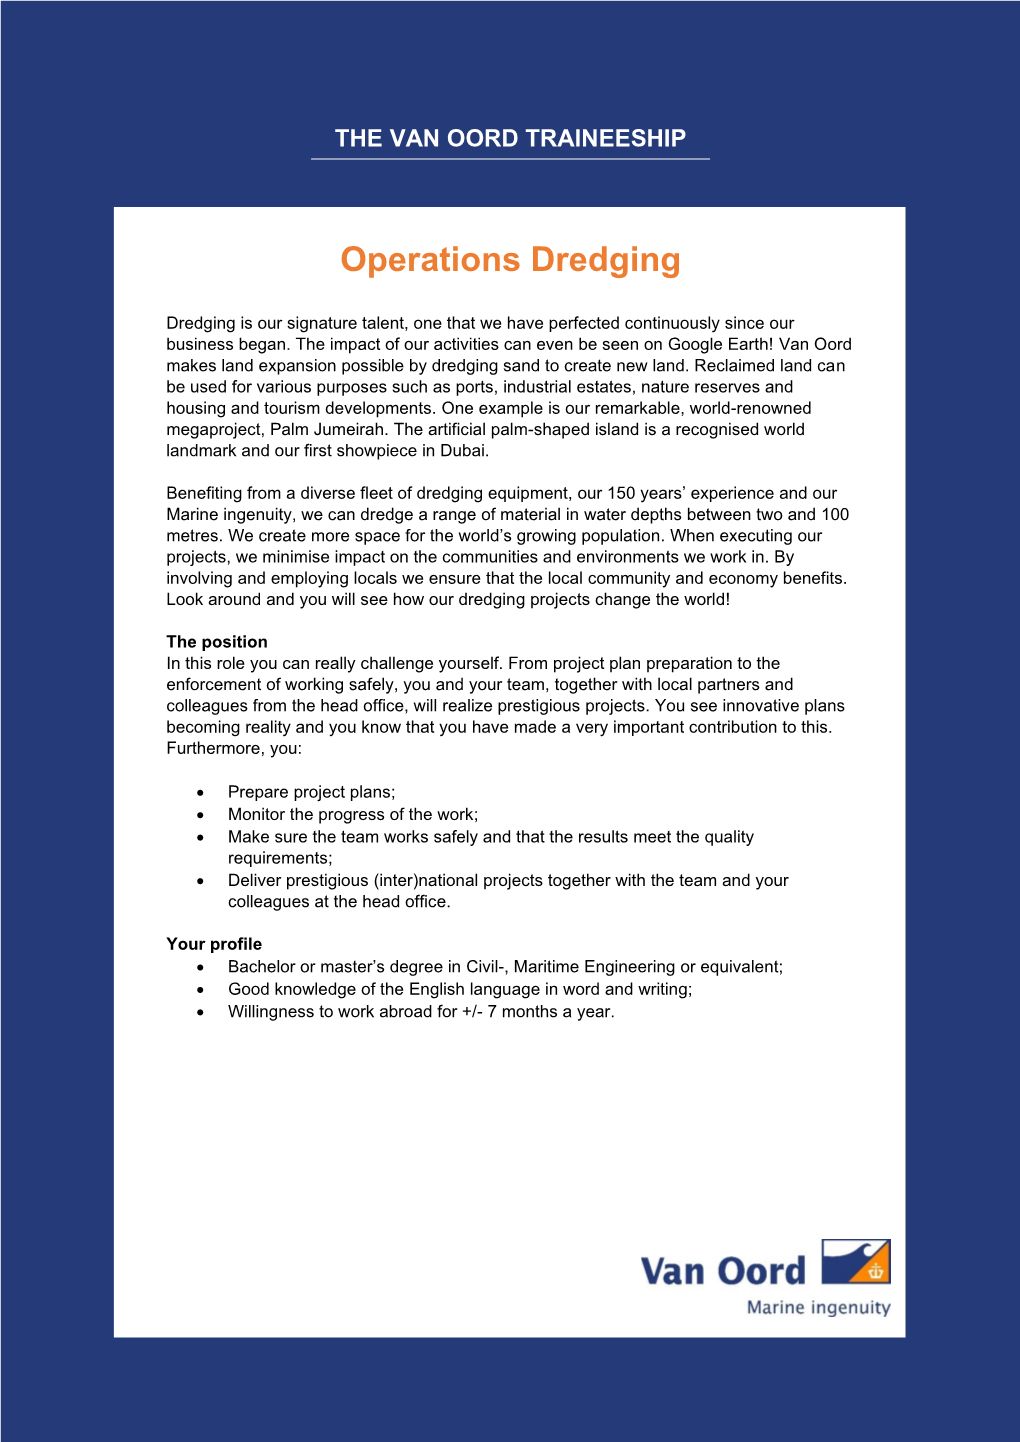 Operations Dredging